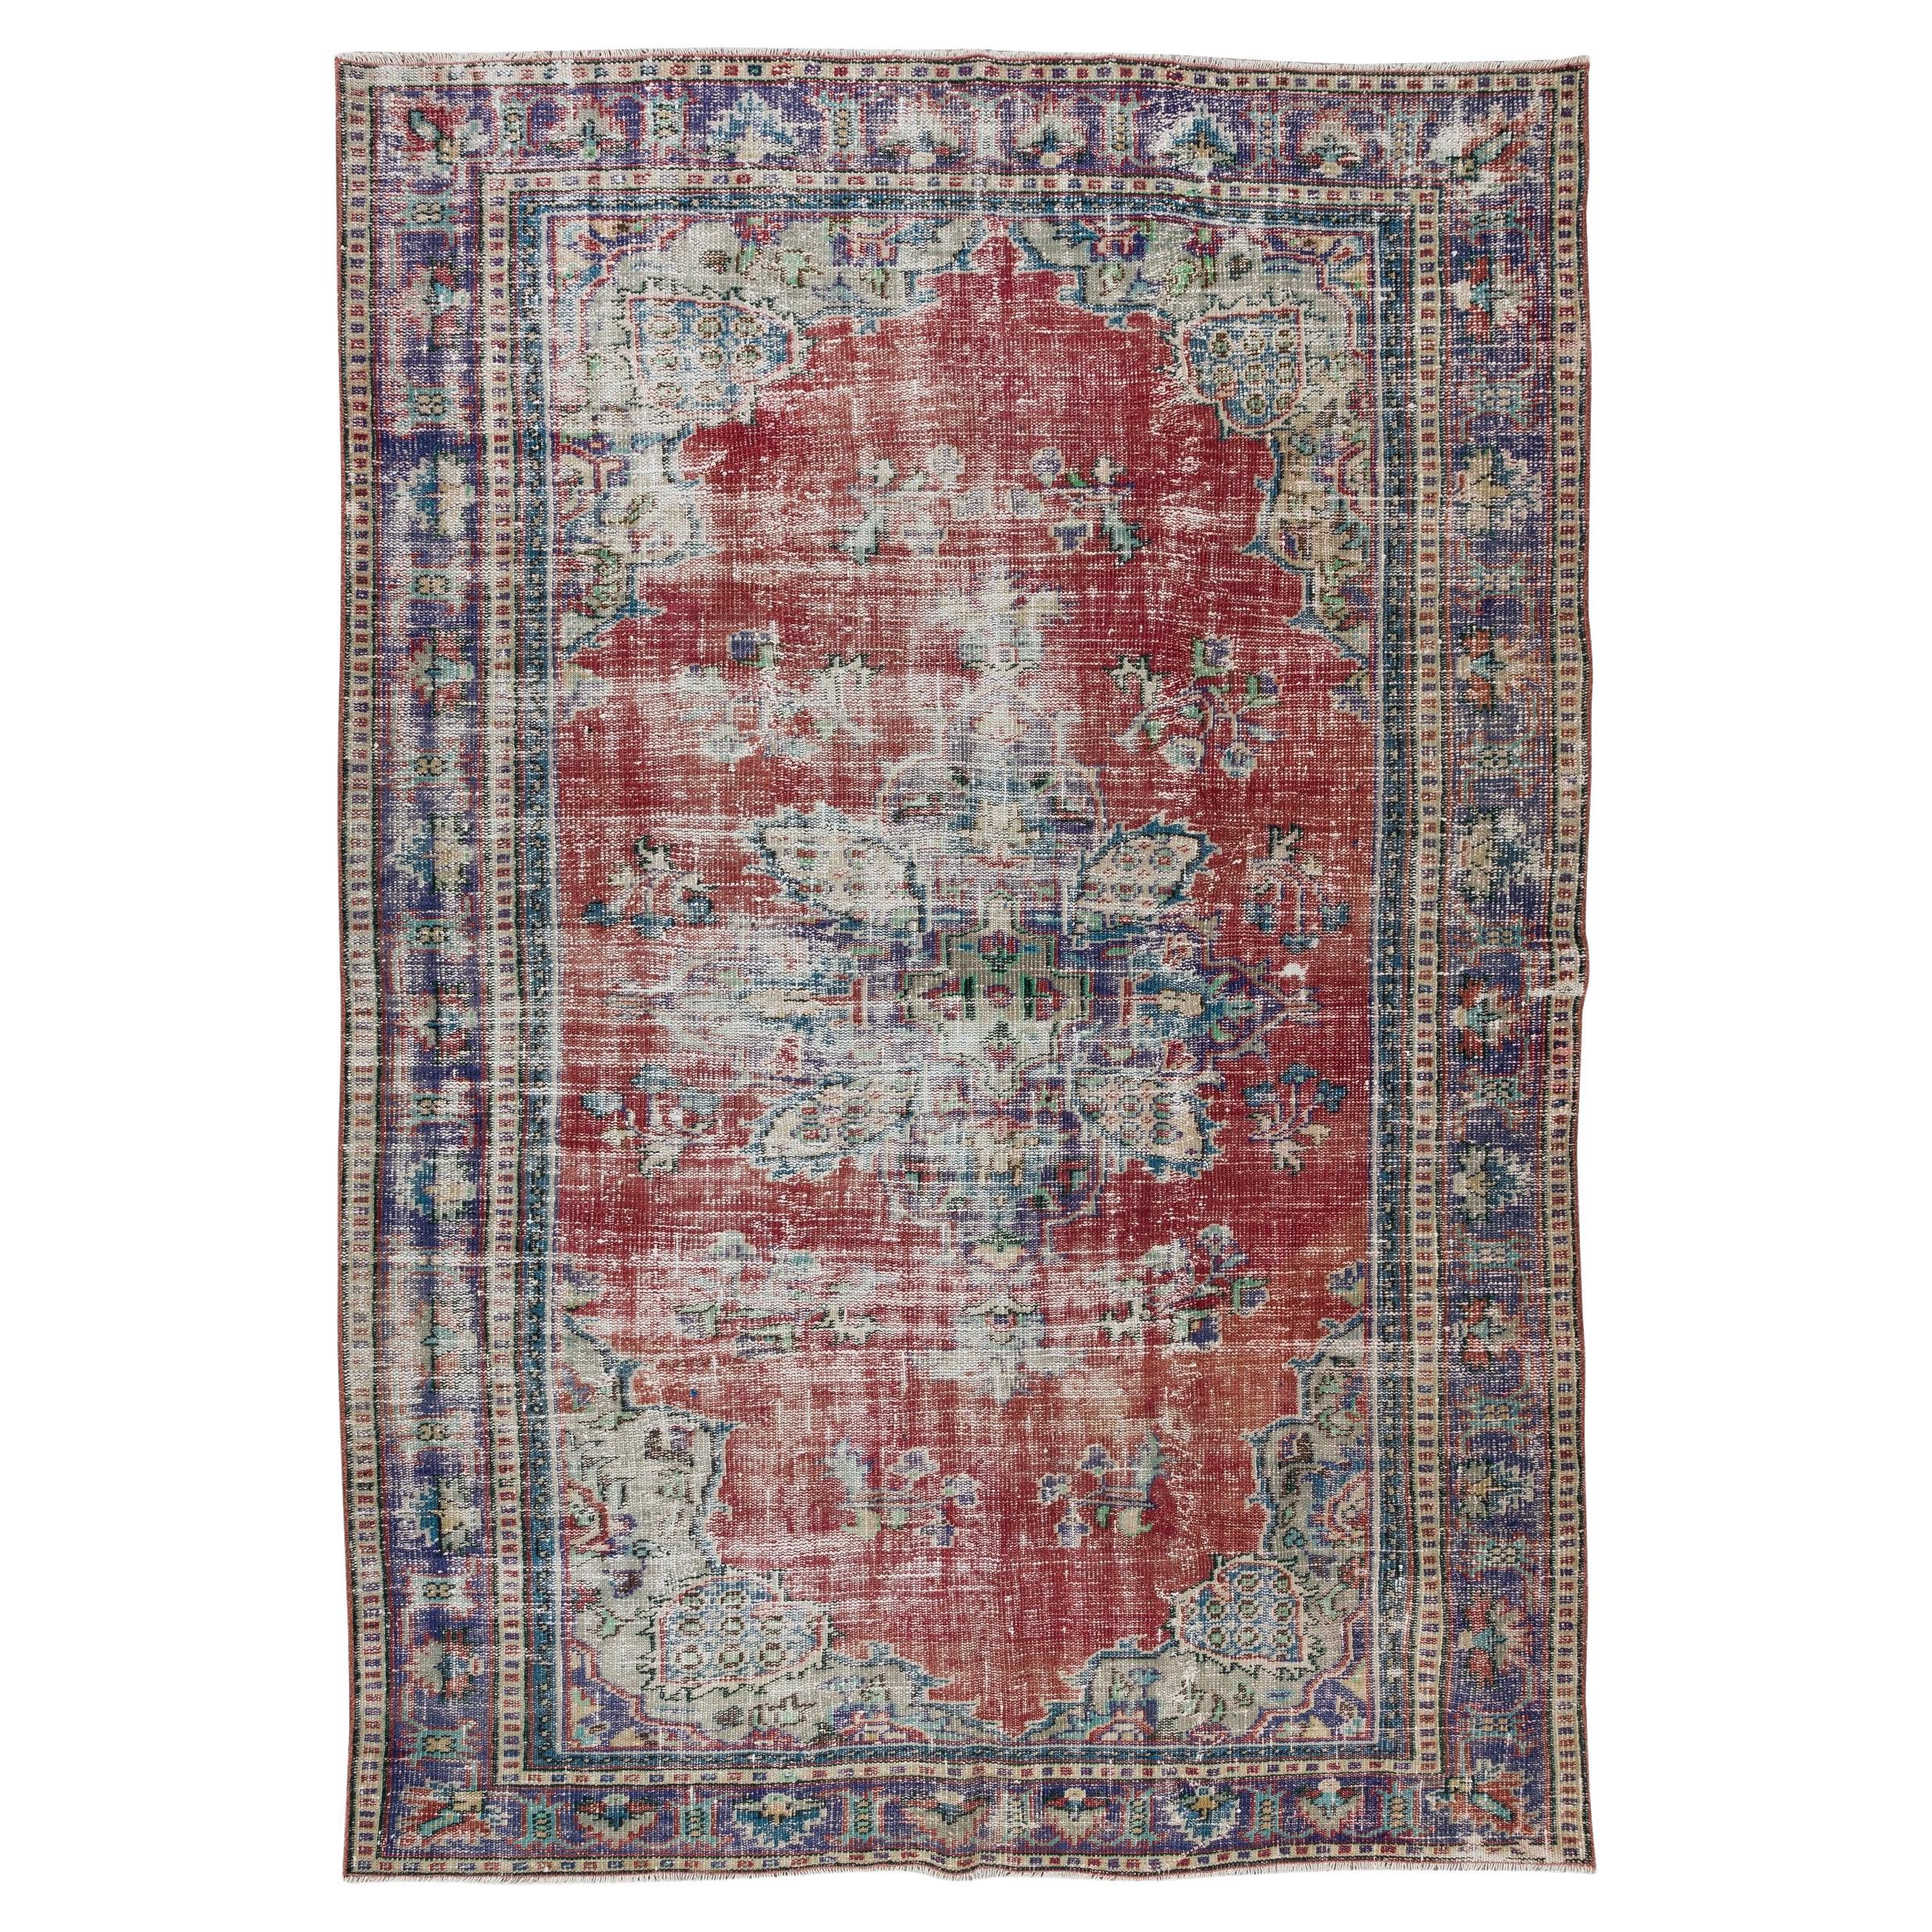 6.6x9.6 Ft Vintage Shabby Chic Handmade Turkish Area Rug with Medallion Design For Sale